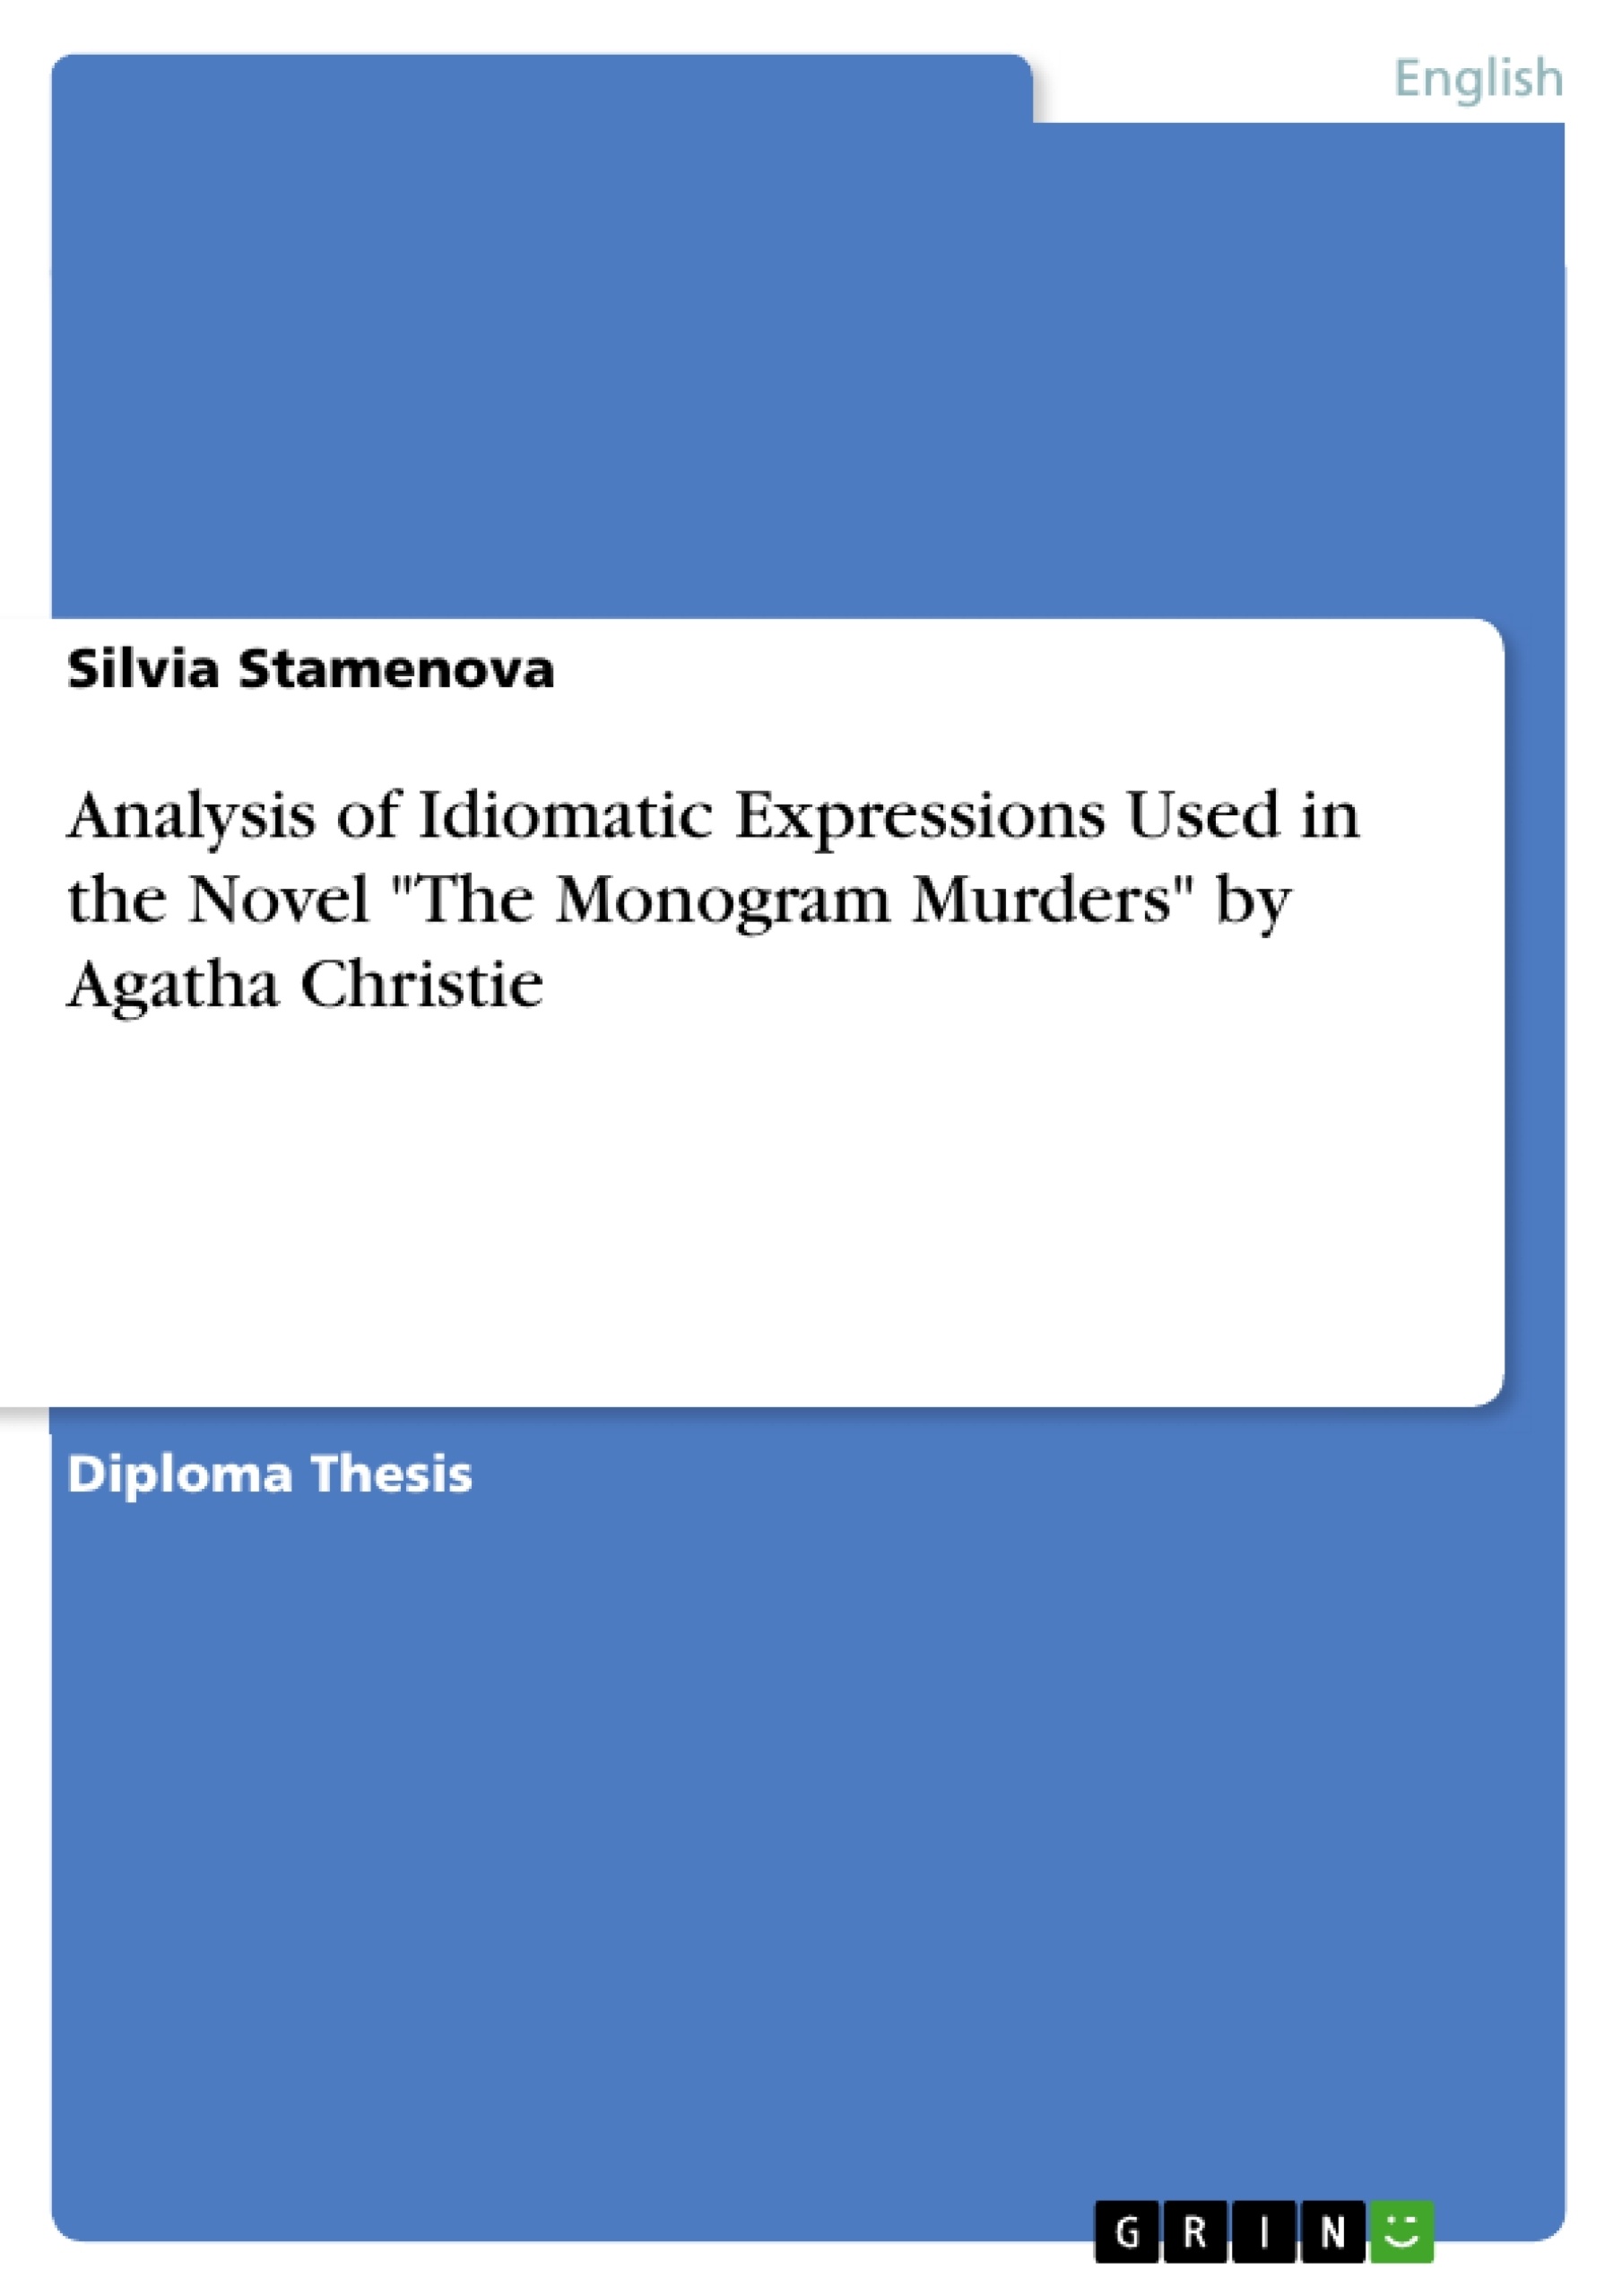 Title: Analysis of Idiomatic Expressions Used in the Novel "The Monogram Murders" by Agatha Christie